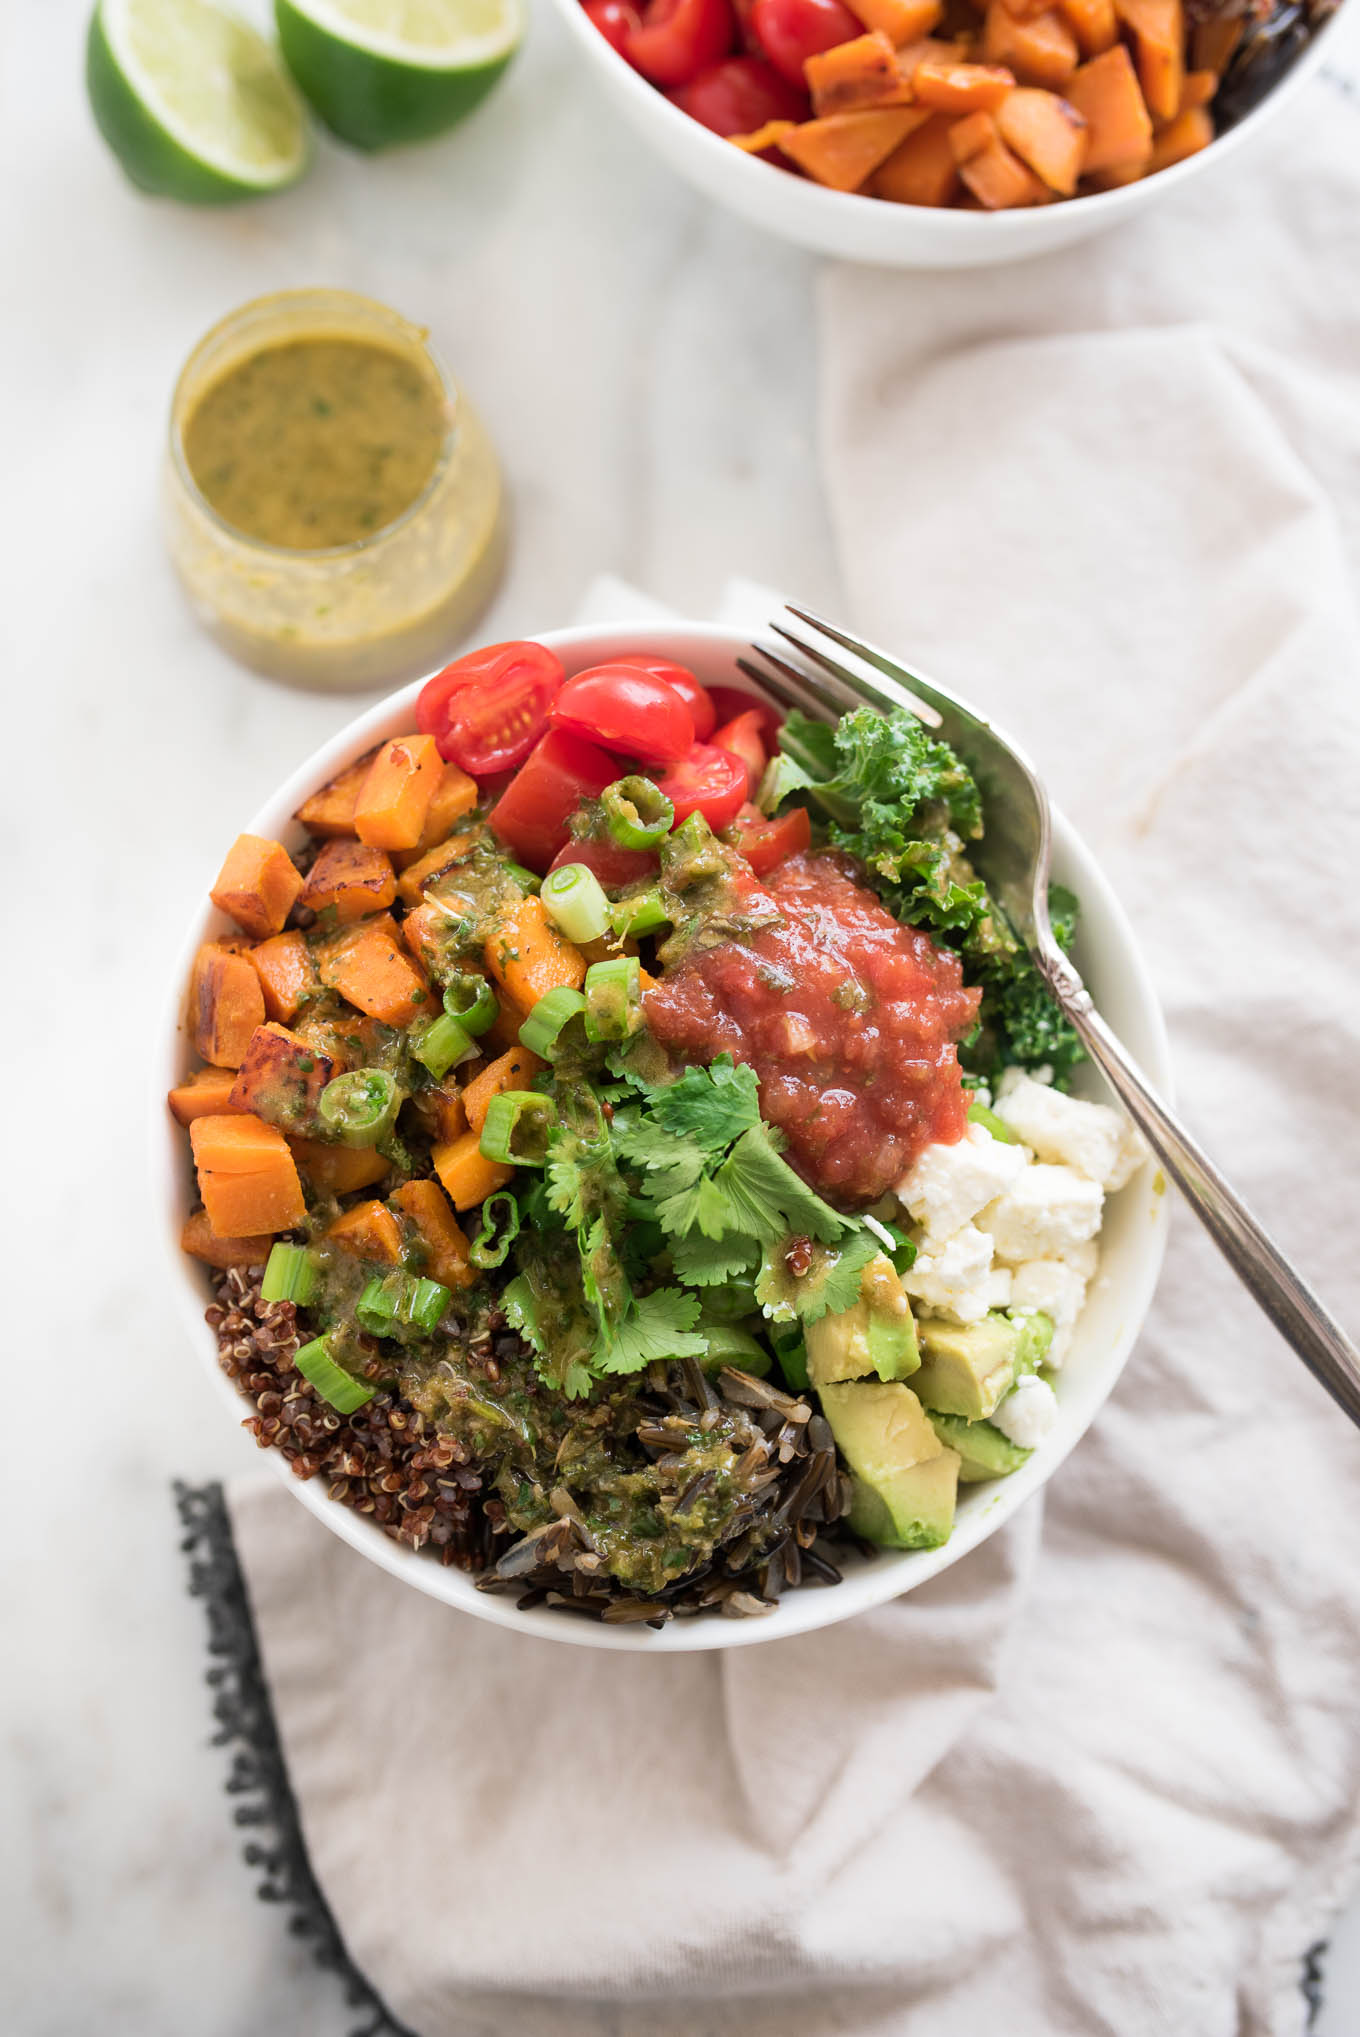 Cilantro Lime Quinoa Veggie Bowl is a protein and nutrient packed vegan and gluten free meal that works great for lunches throughout the week!